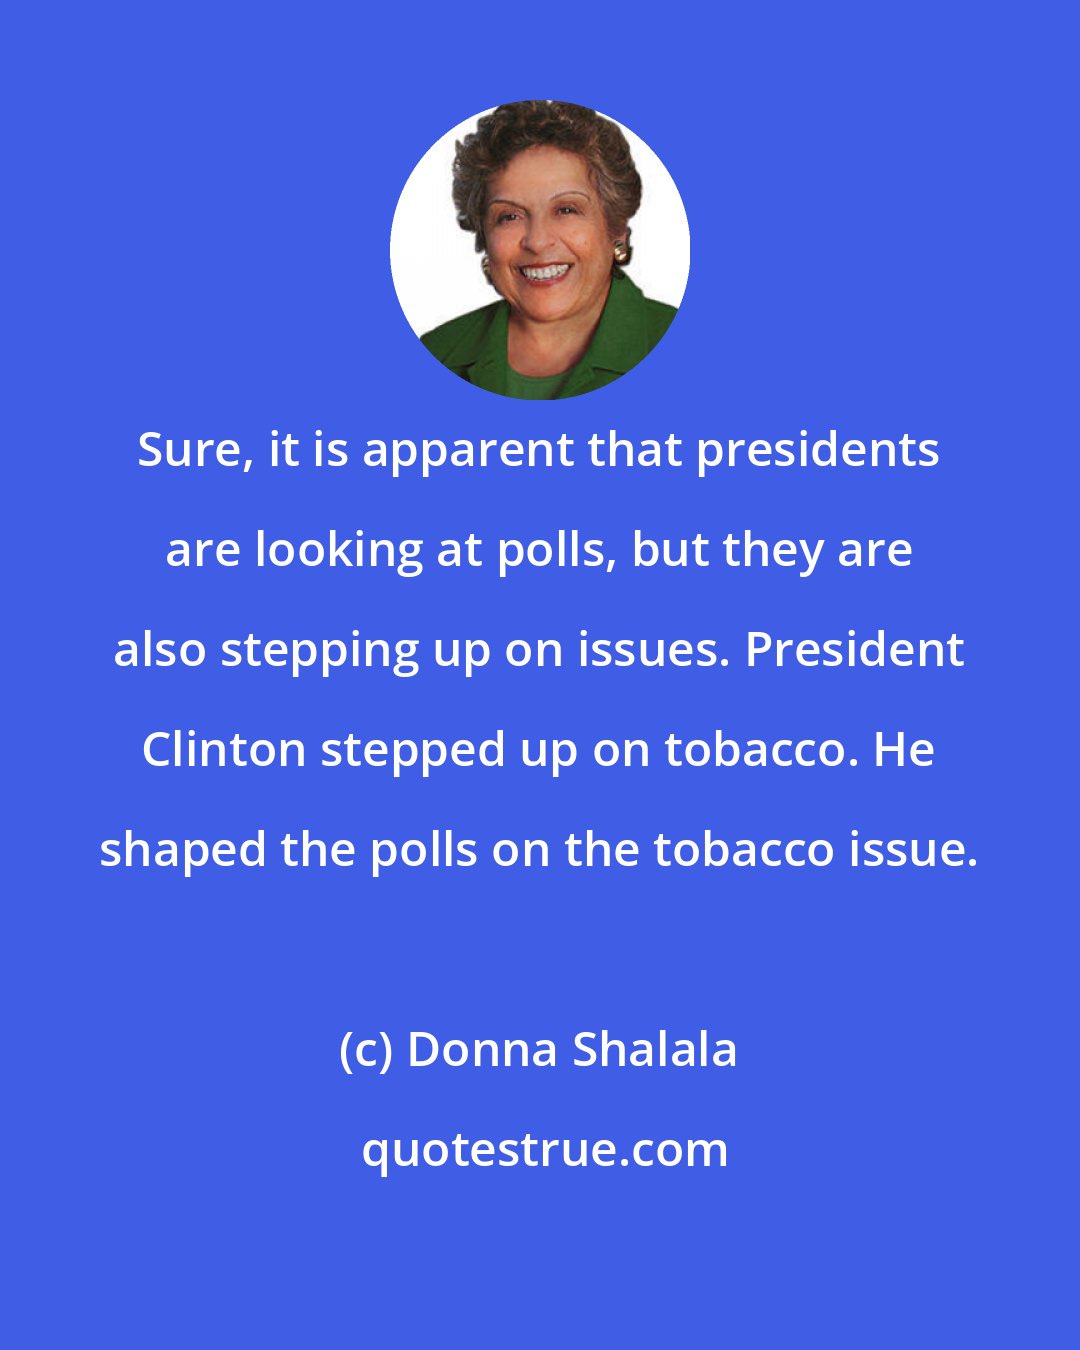 Donna Shalala: Sure, it is apparent that presidents are looking at polls, but they are also stepping up on issues. President Clinton stepped up on tobacco. He shaped the polls on the tobacco issue.